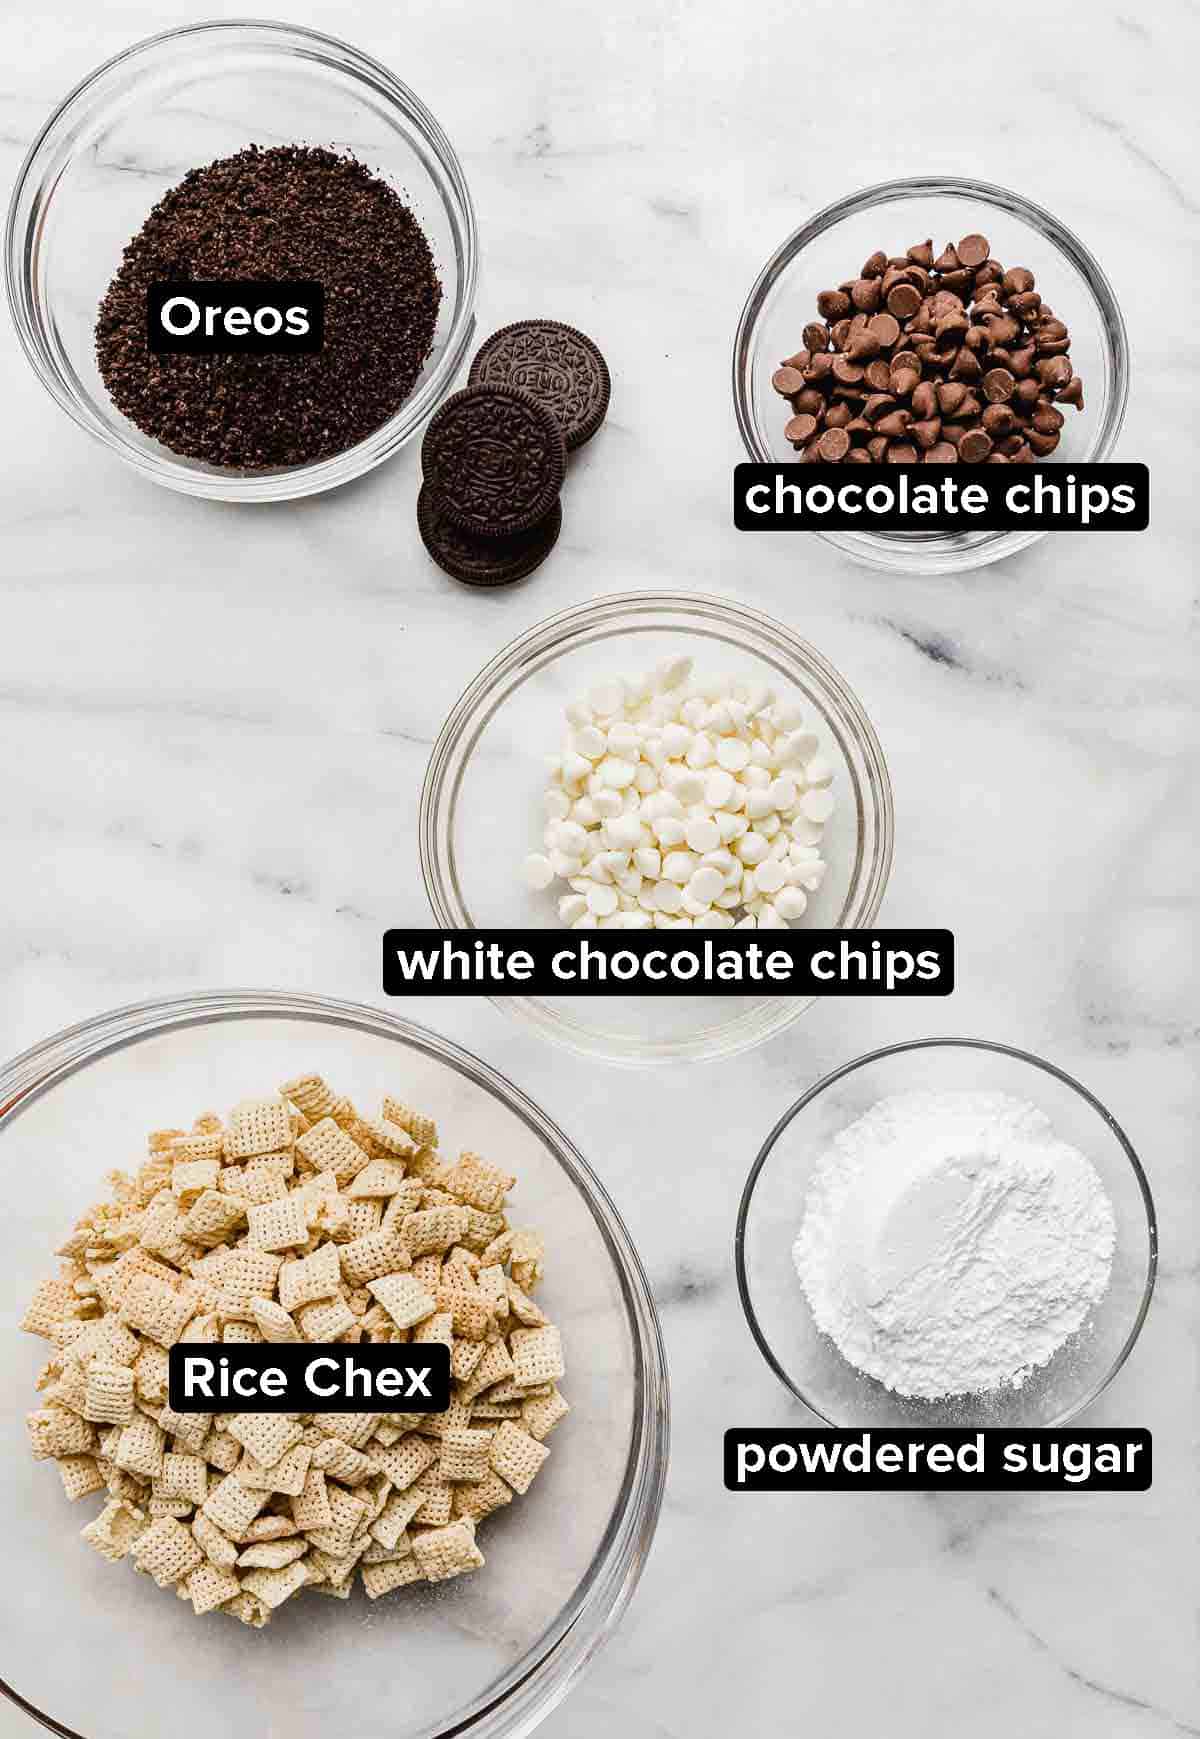 Oreo Muddy Buddies ingredients on a white marble background: Oreo crumbs, Chex cereal, white and milk chocolate chips, and powdered sugar.